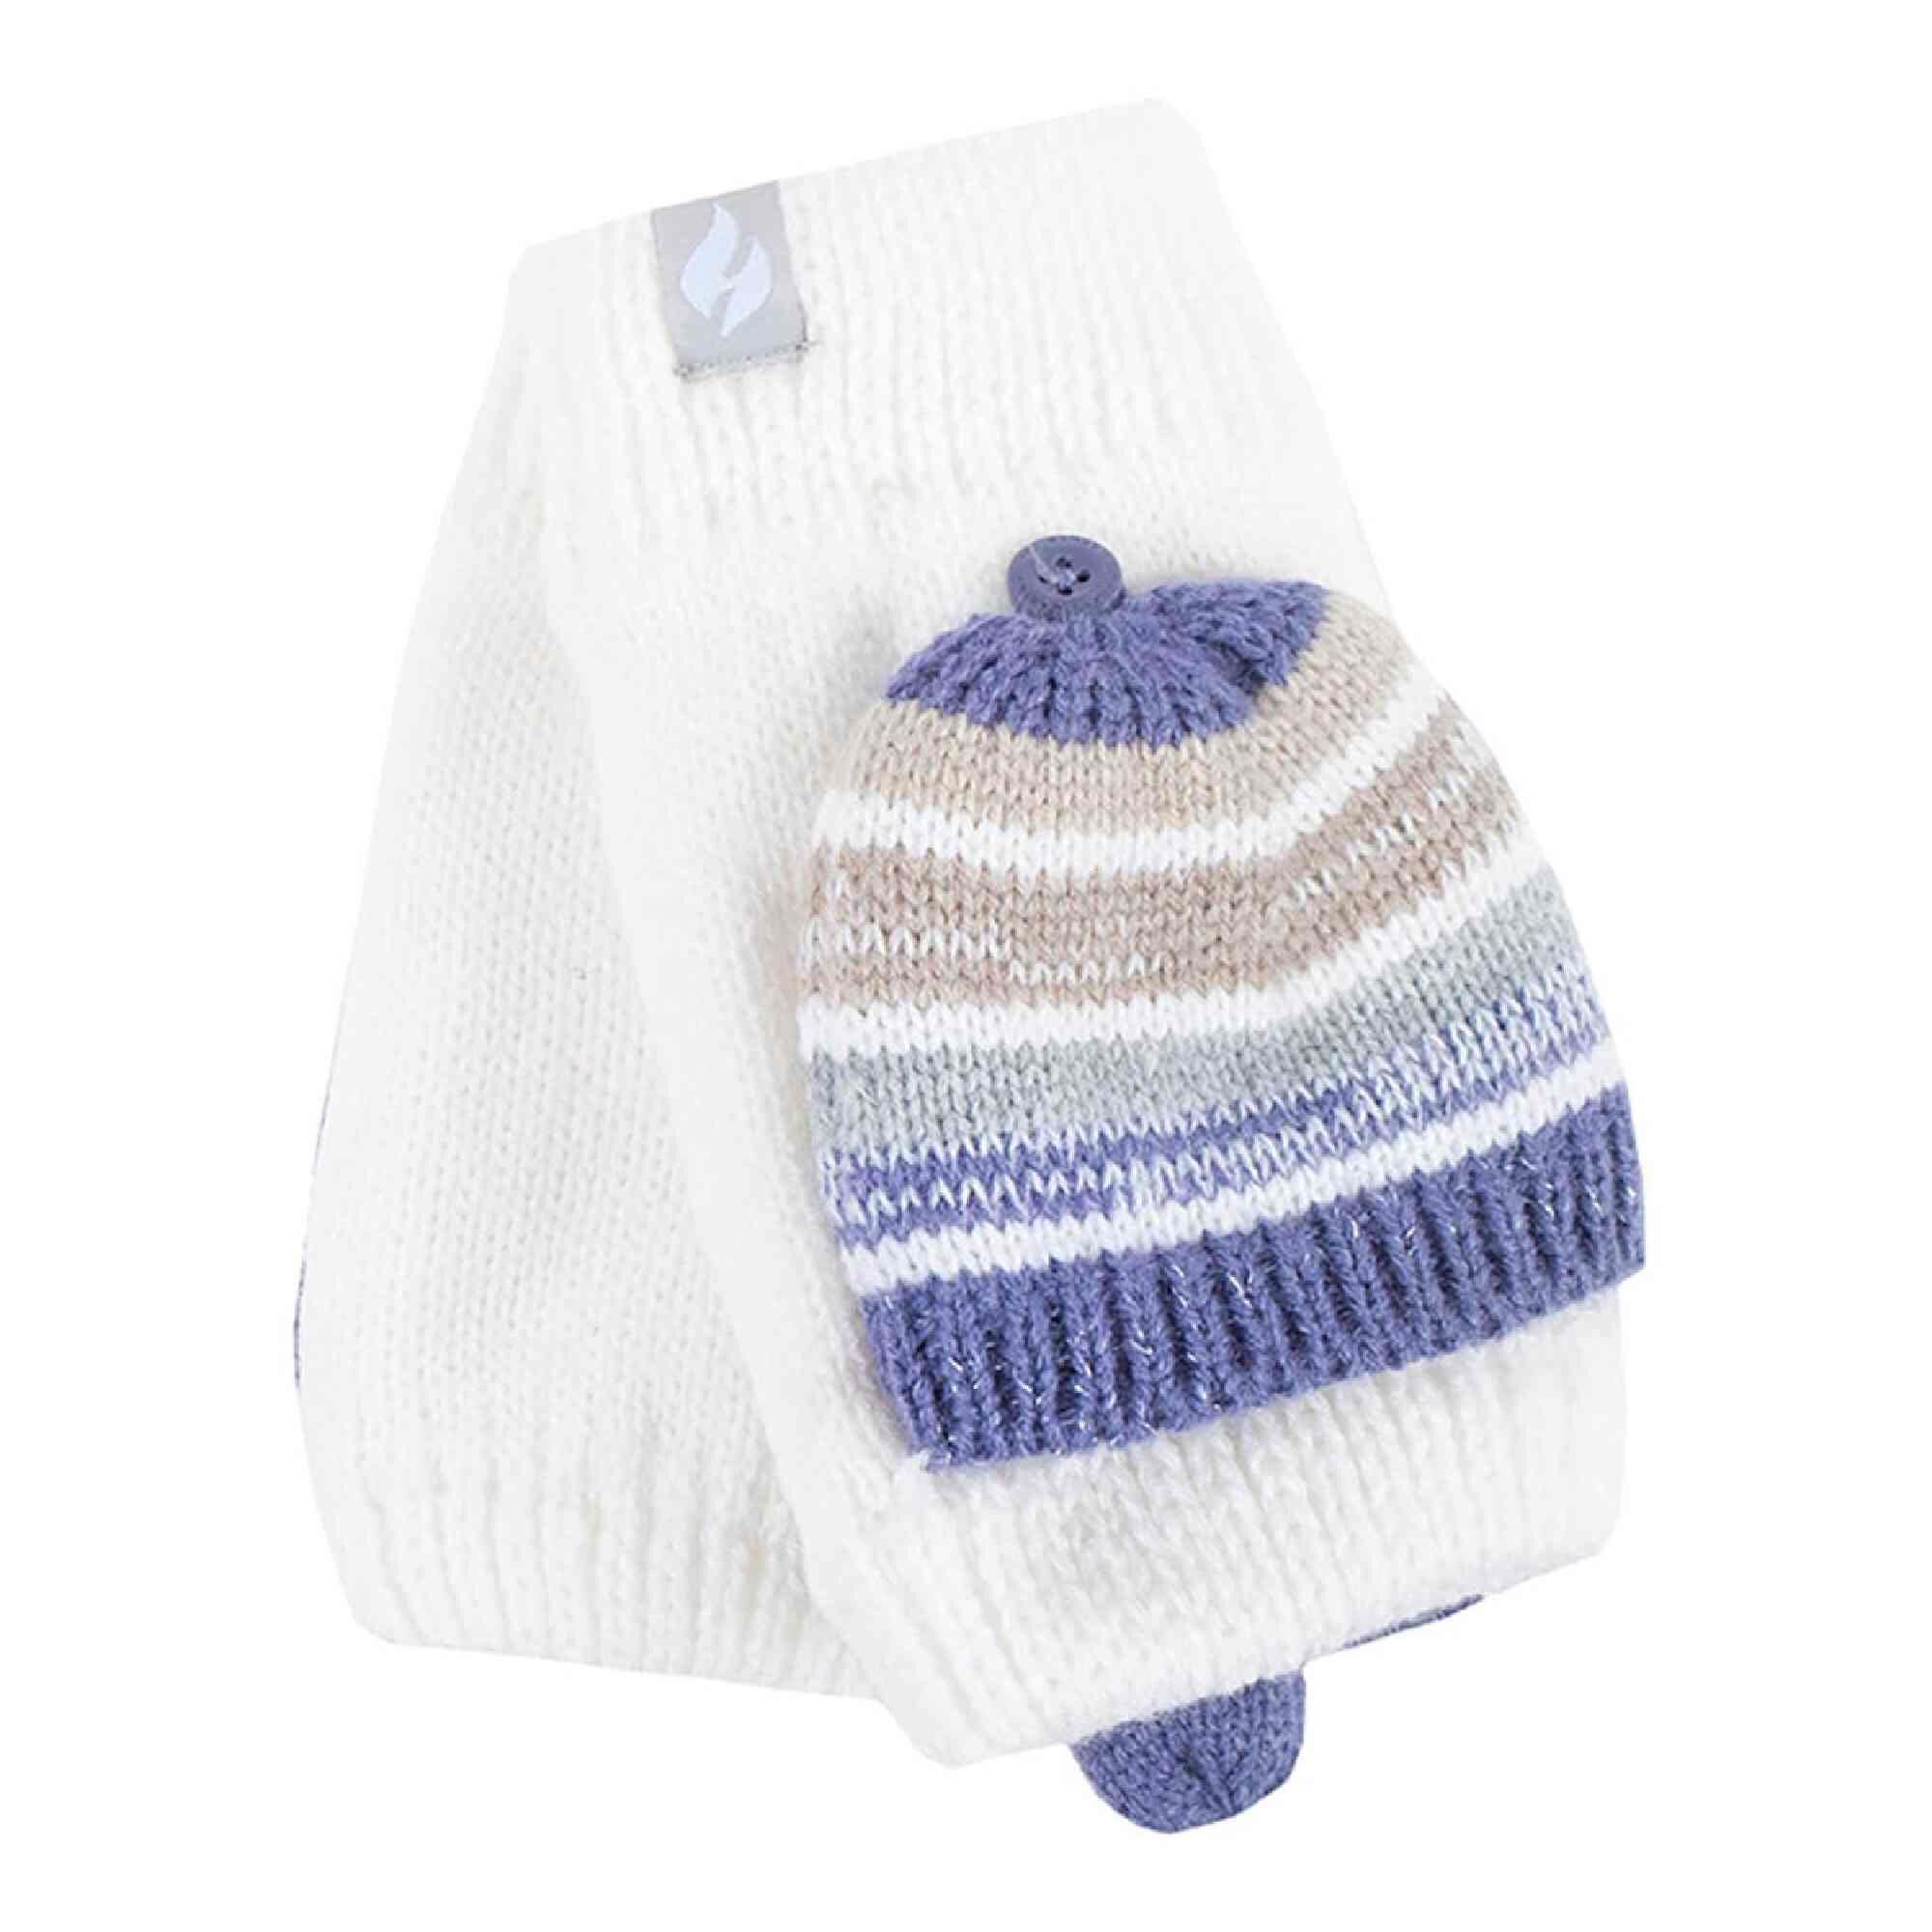 HEAT HOLDERS Ladies Striped Thermal Knitted Converter Mitten Gloves